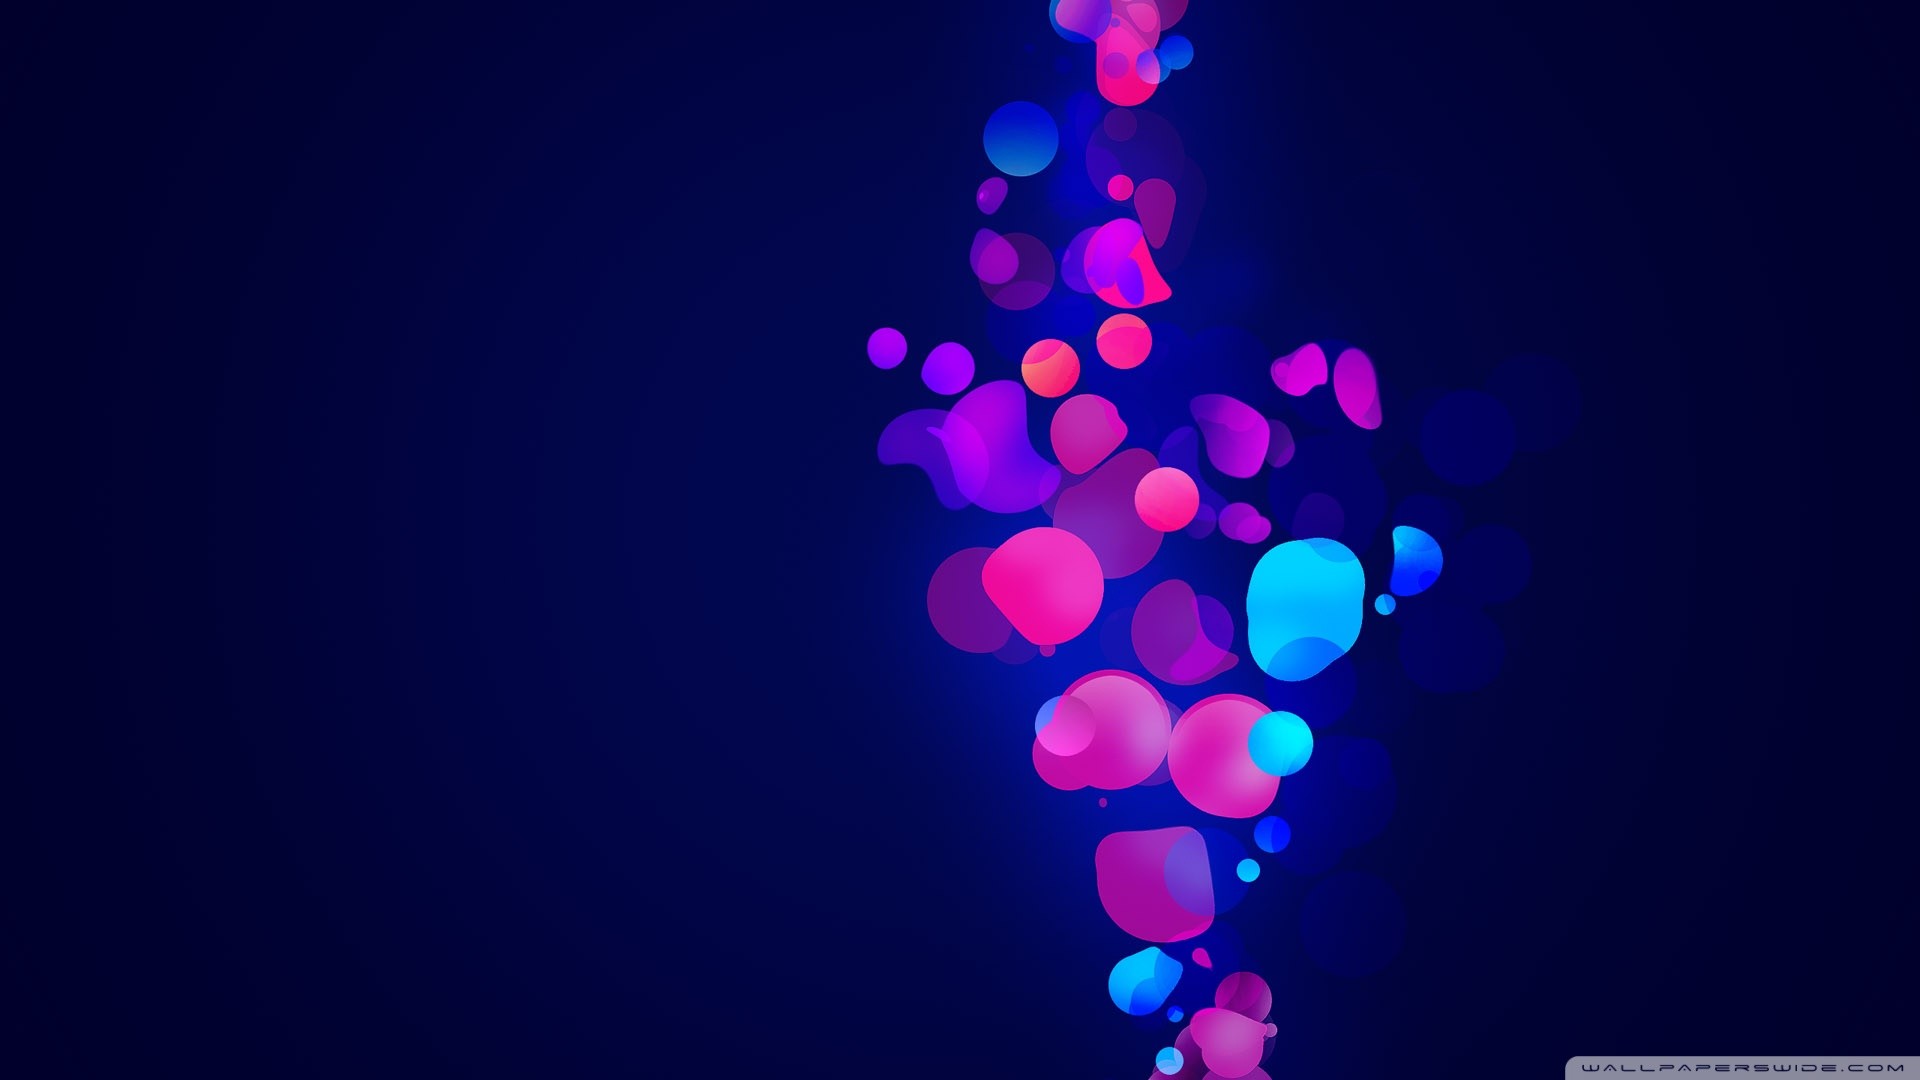 1920x1080 4k Abstract art bubbles Wallpaper for desktop and mobile phones.